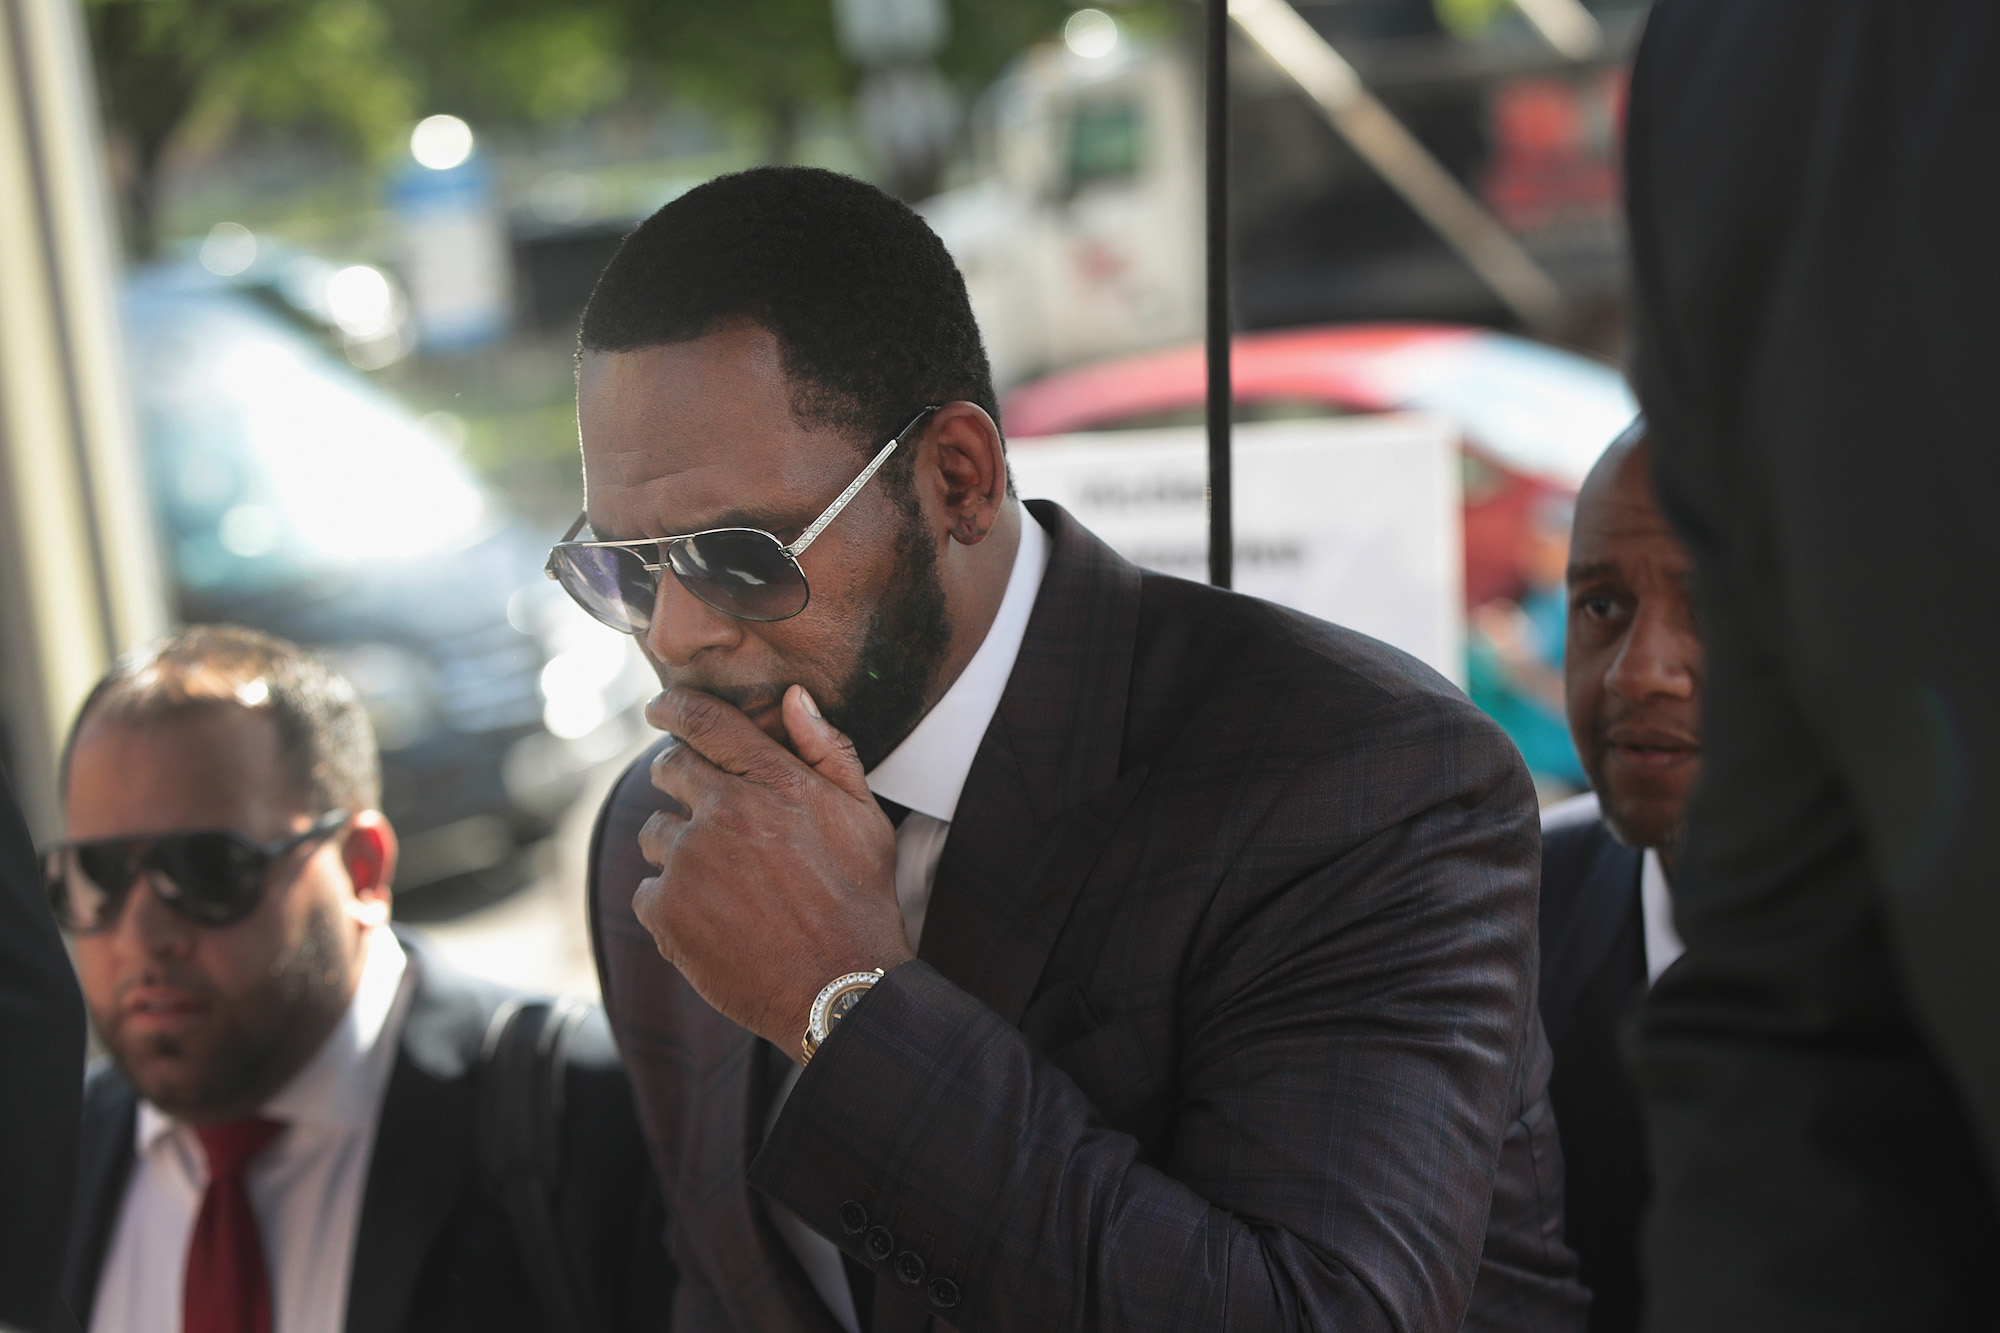 R. Kelly covers his mouth entering the courthouse